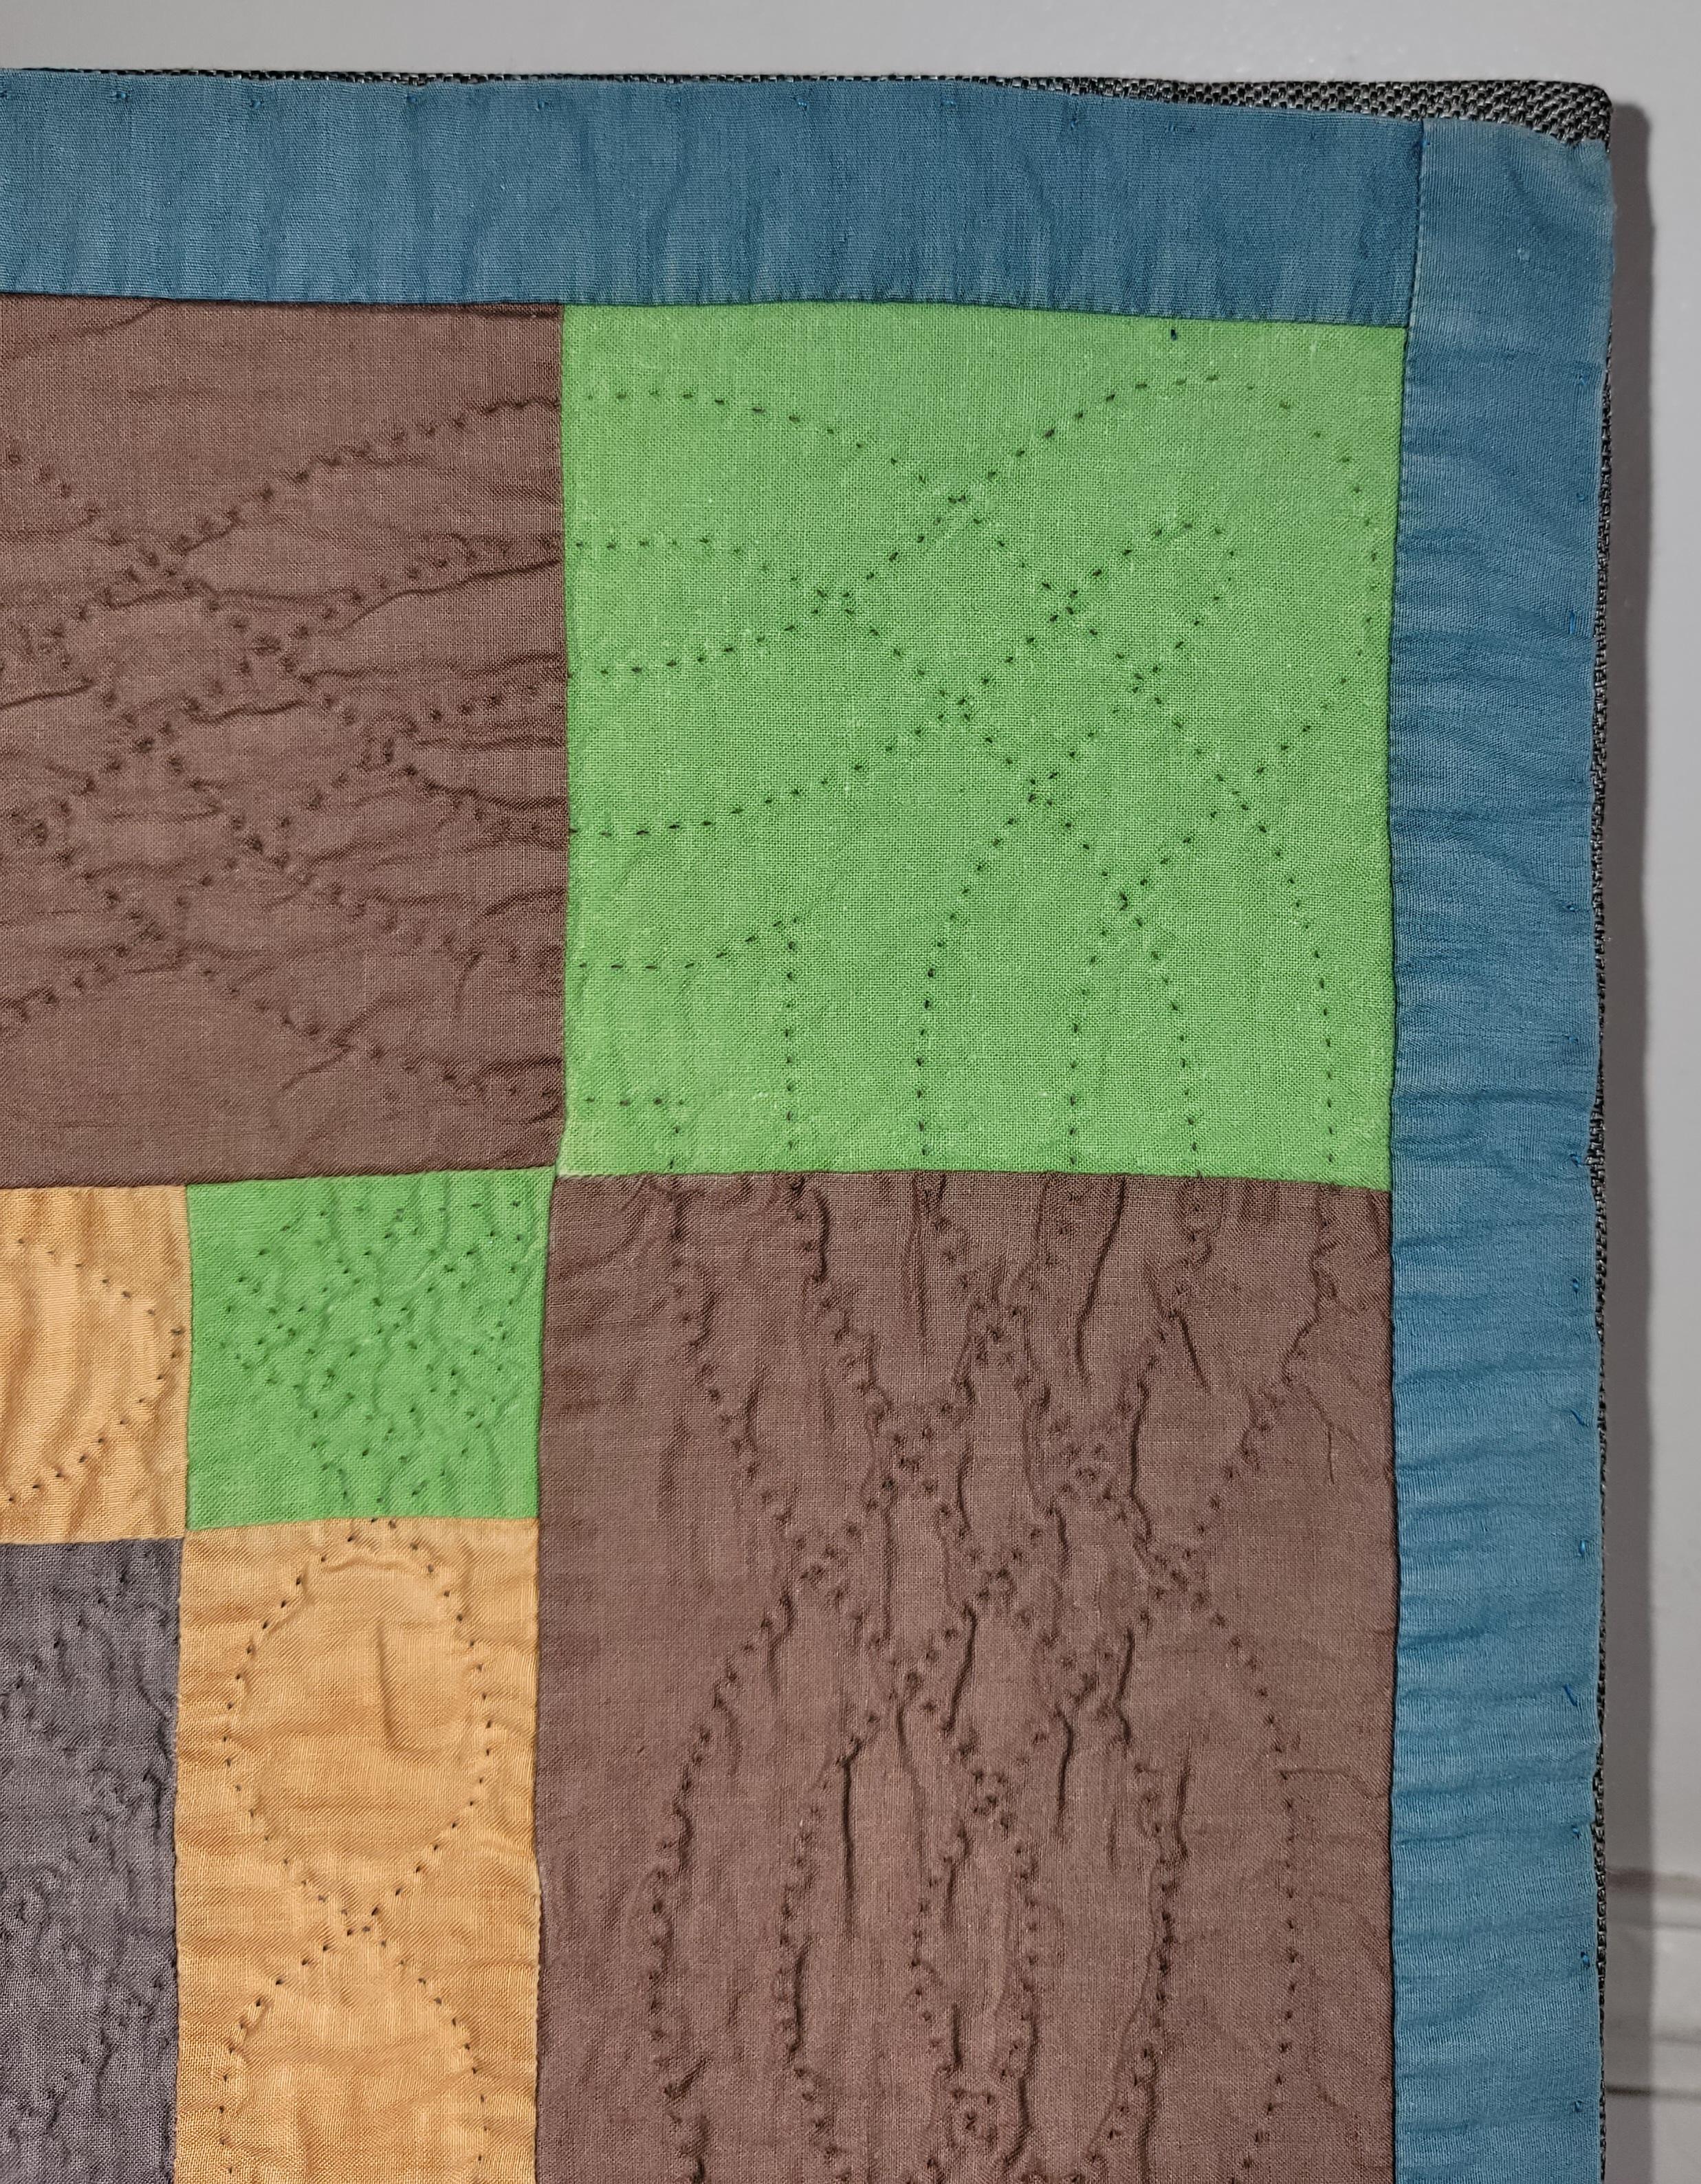 20th century Hand Sewn Amish bars crib quilt from Lancaster County, Pennsylvania in cotton and finely quilted. This cool most unusual colors Amish crib quilt is in great condition. This crib quilt has a modern or very simple look. Can hang